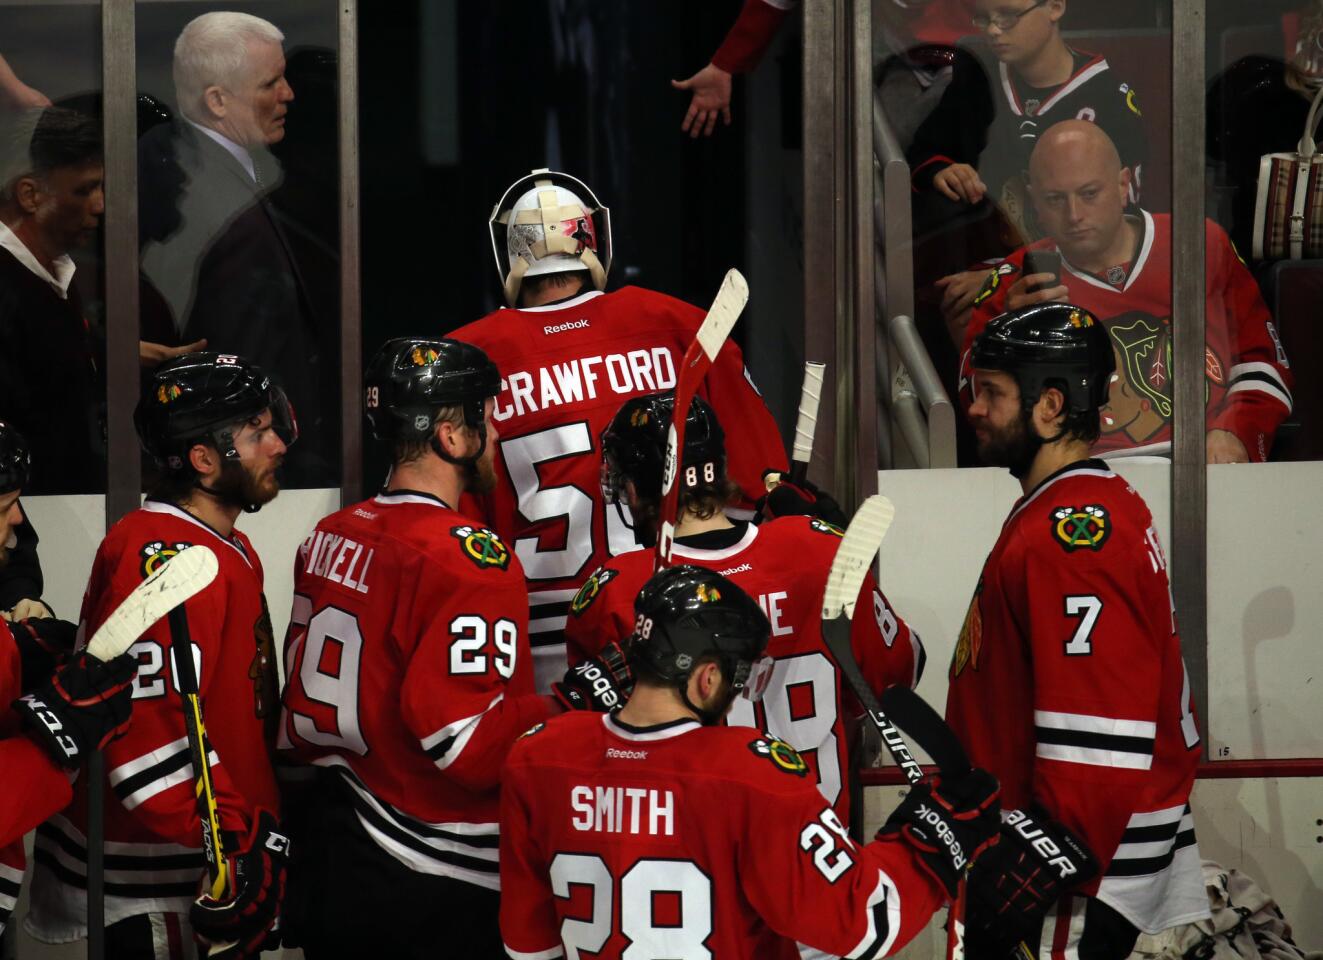 Blackhawks goalie Corey Crawford and teammates head to the locker room after the 6-2 loss.